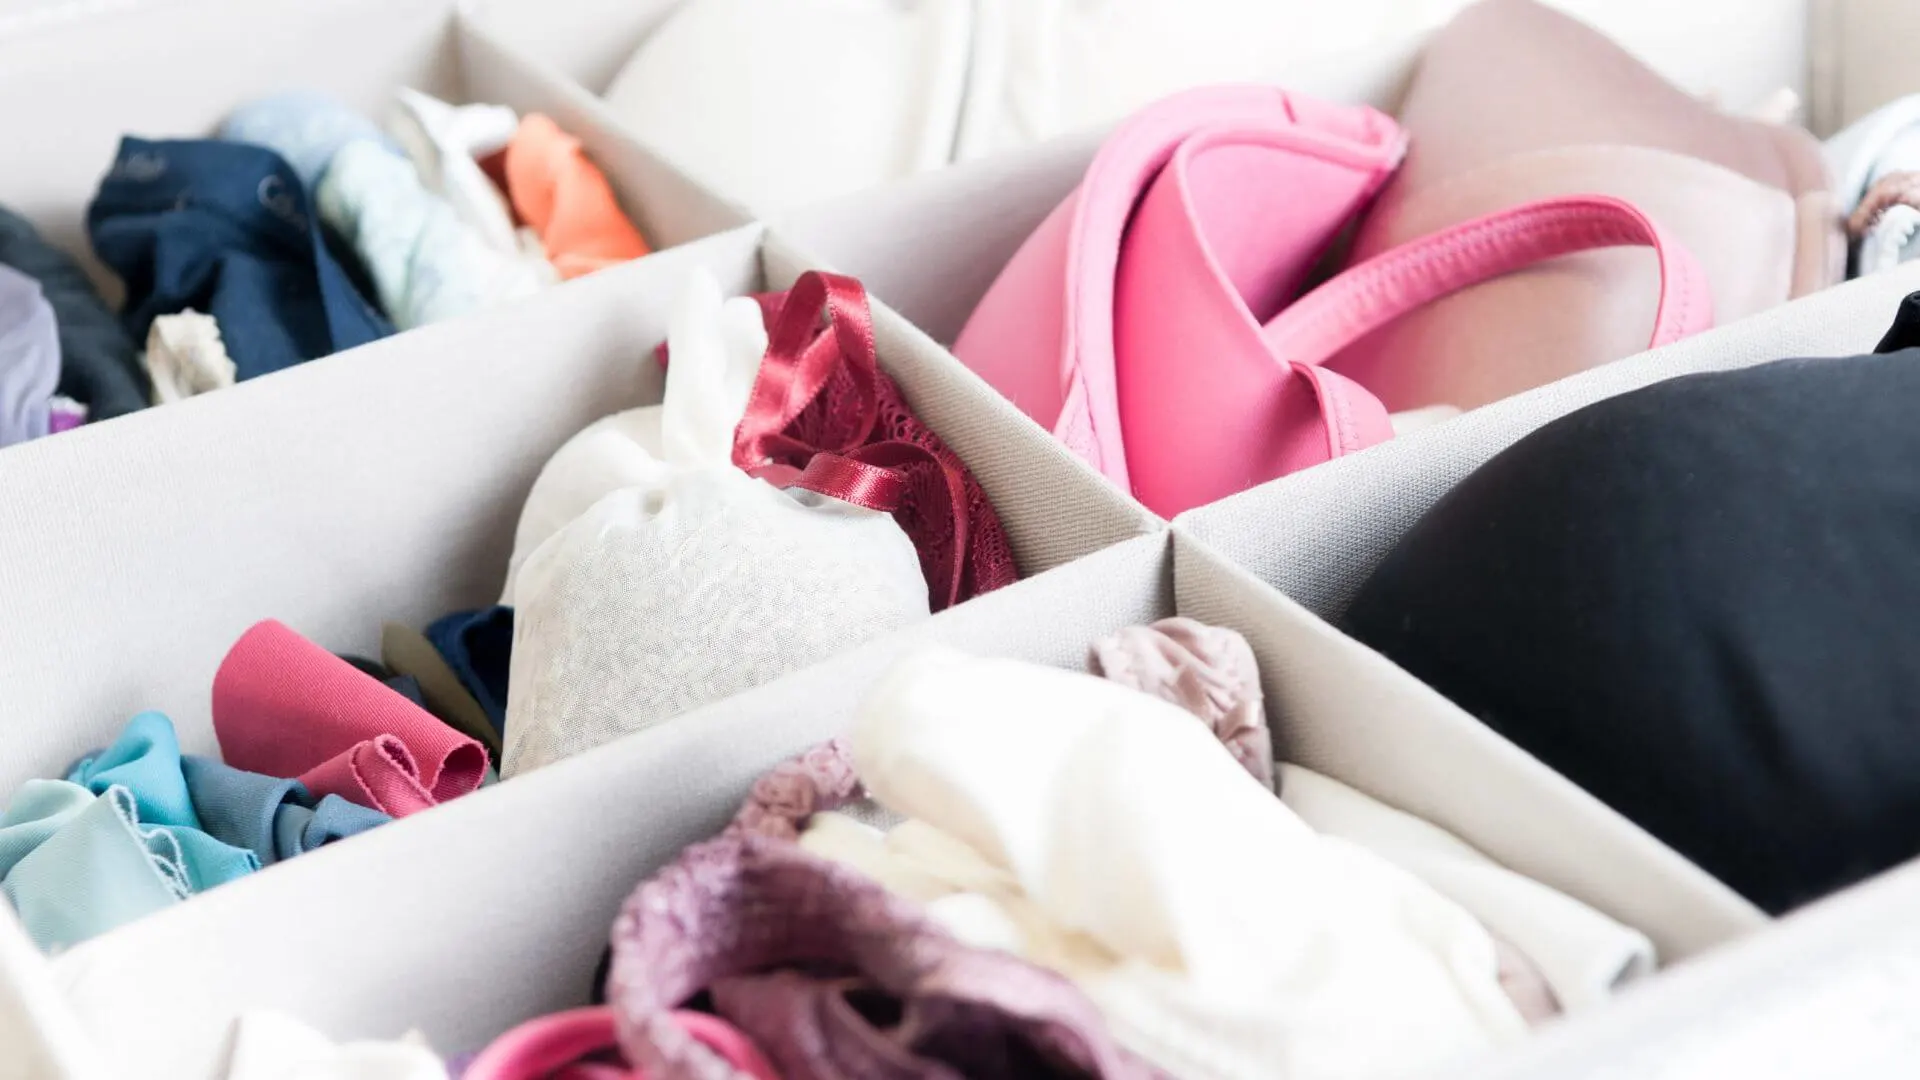 Signs You Need to Update The Contents of Your Underwear Drawer